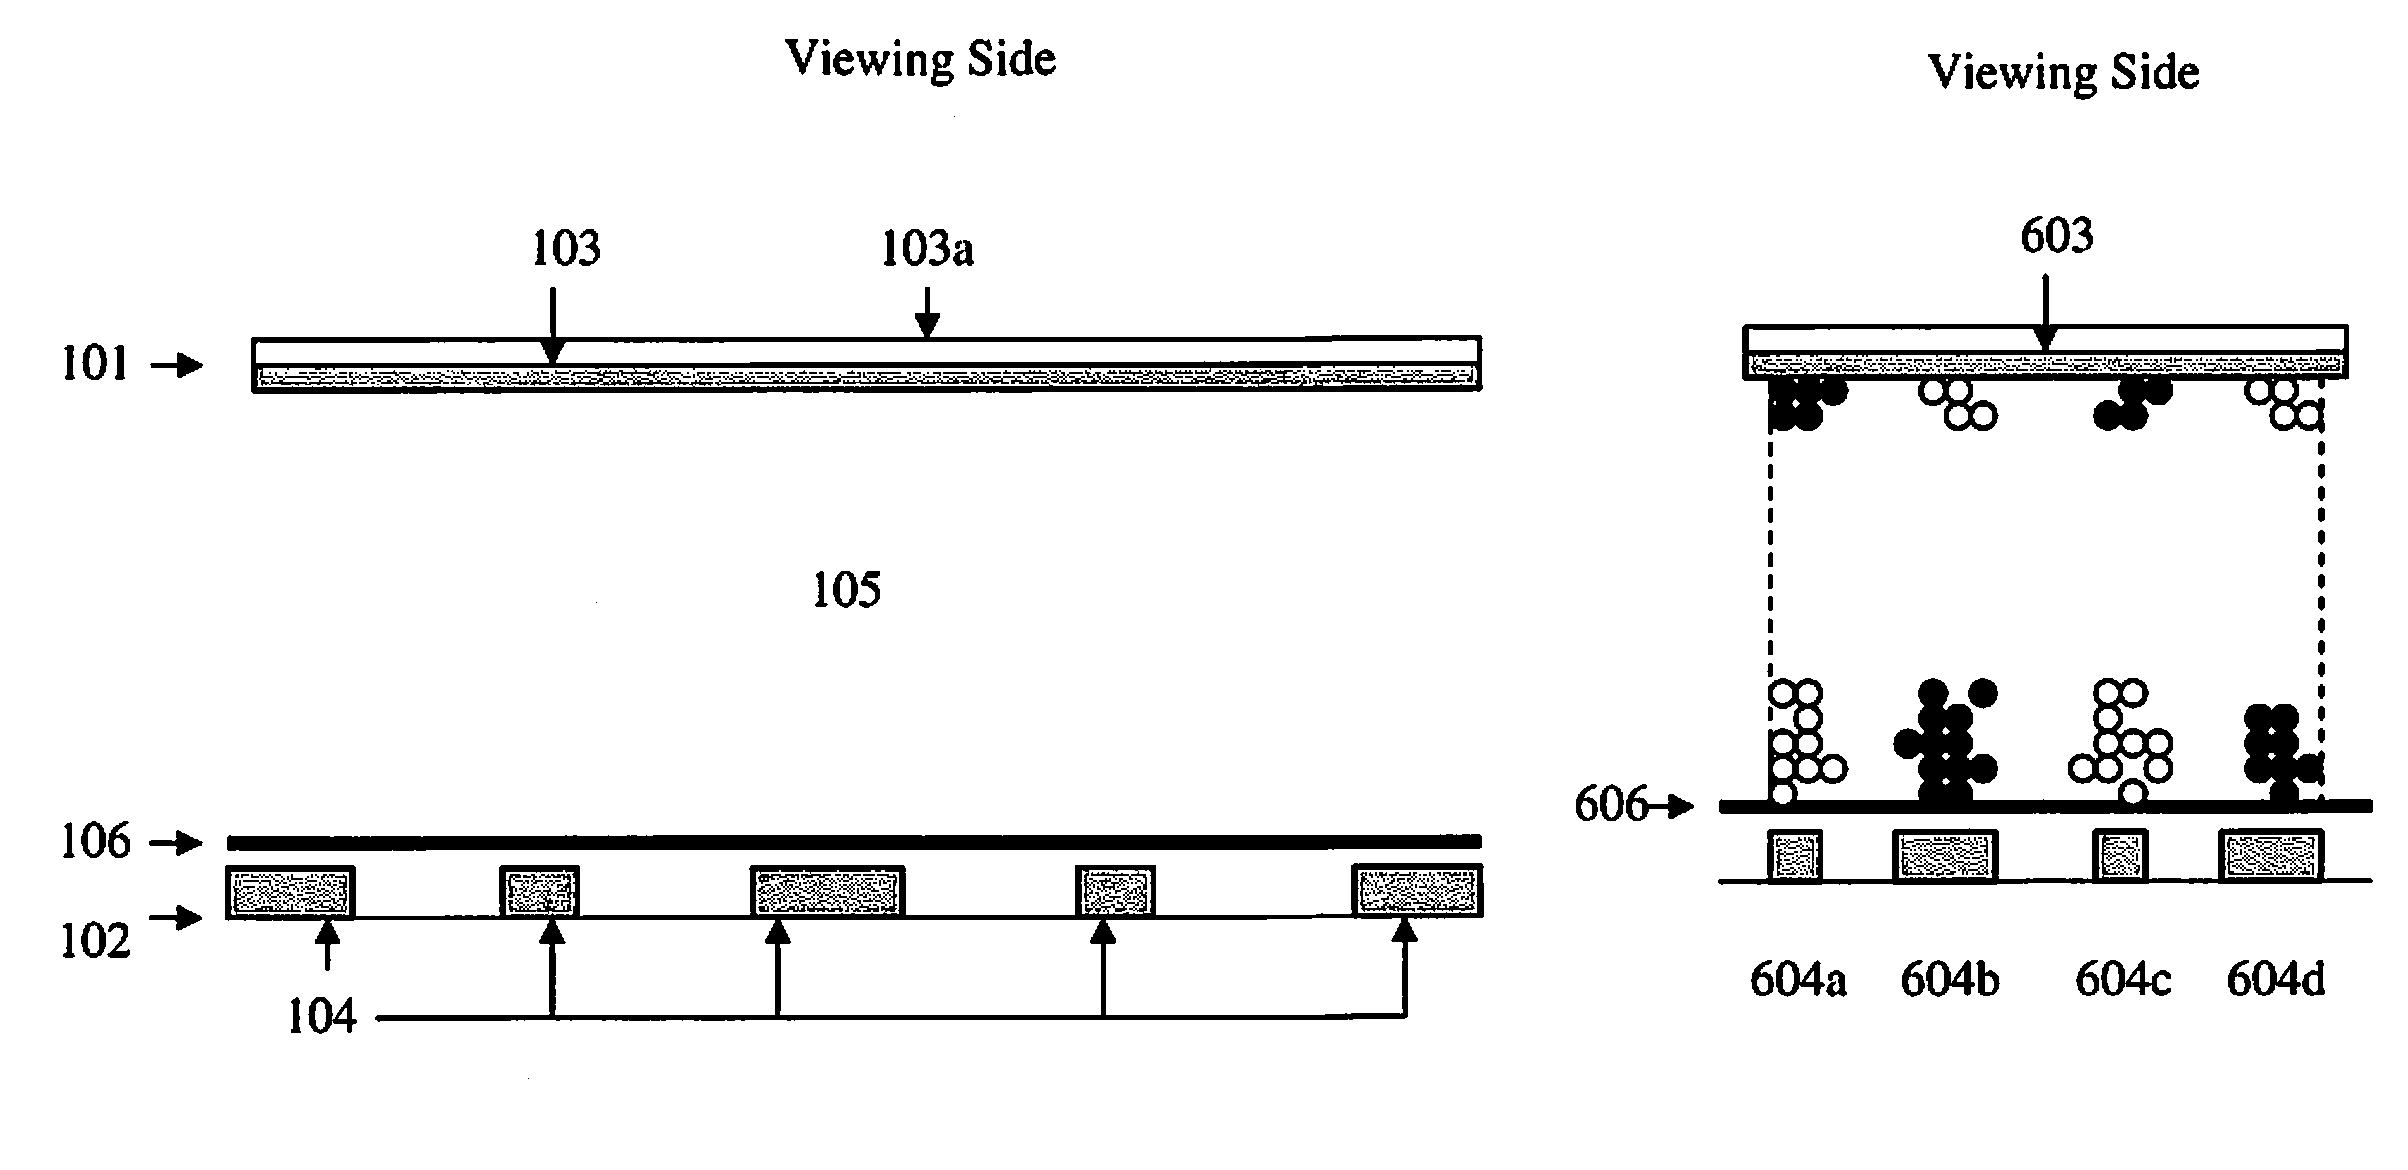 Shutter mode for color display devices